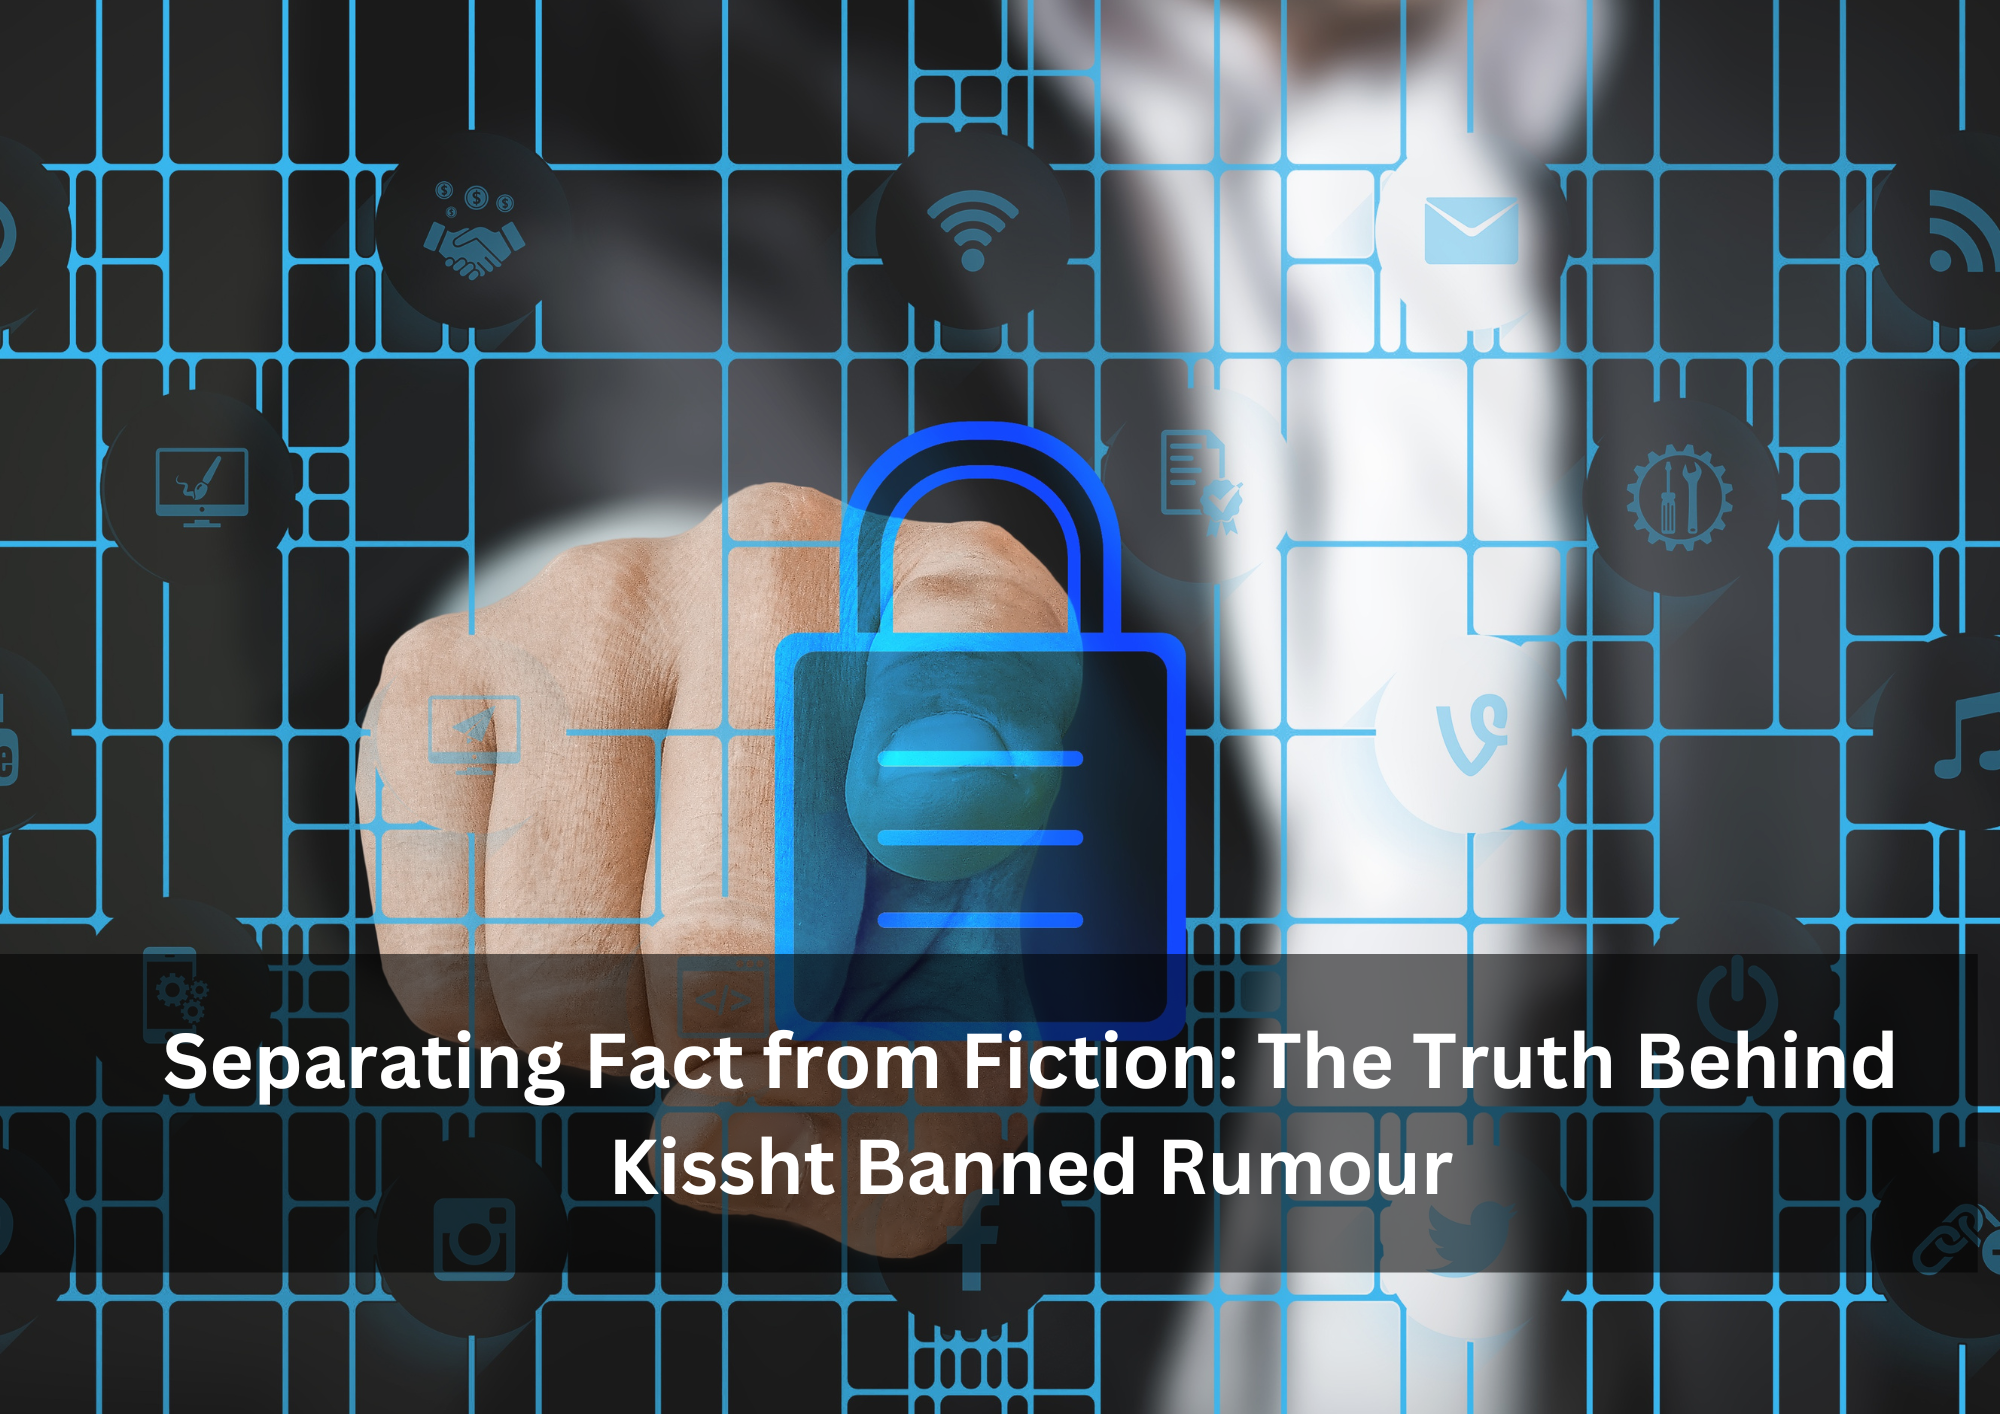 Separating Fact from Fiction: The Truth Behind Kissht Banned Rumour